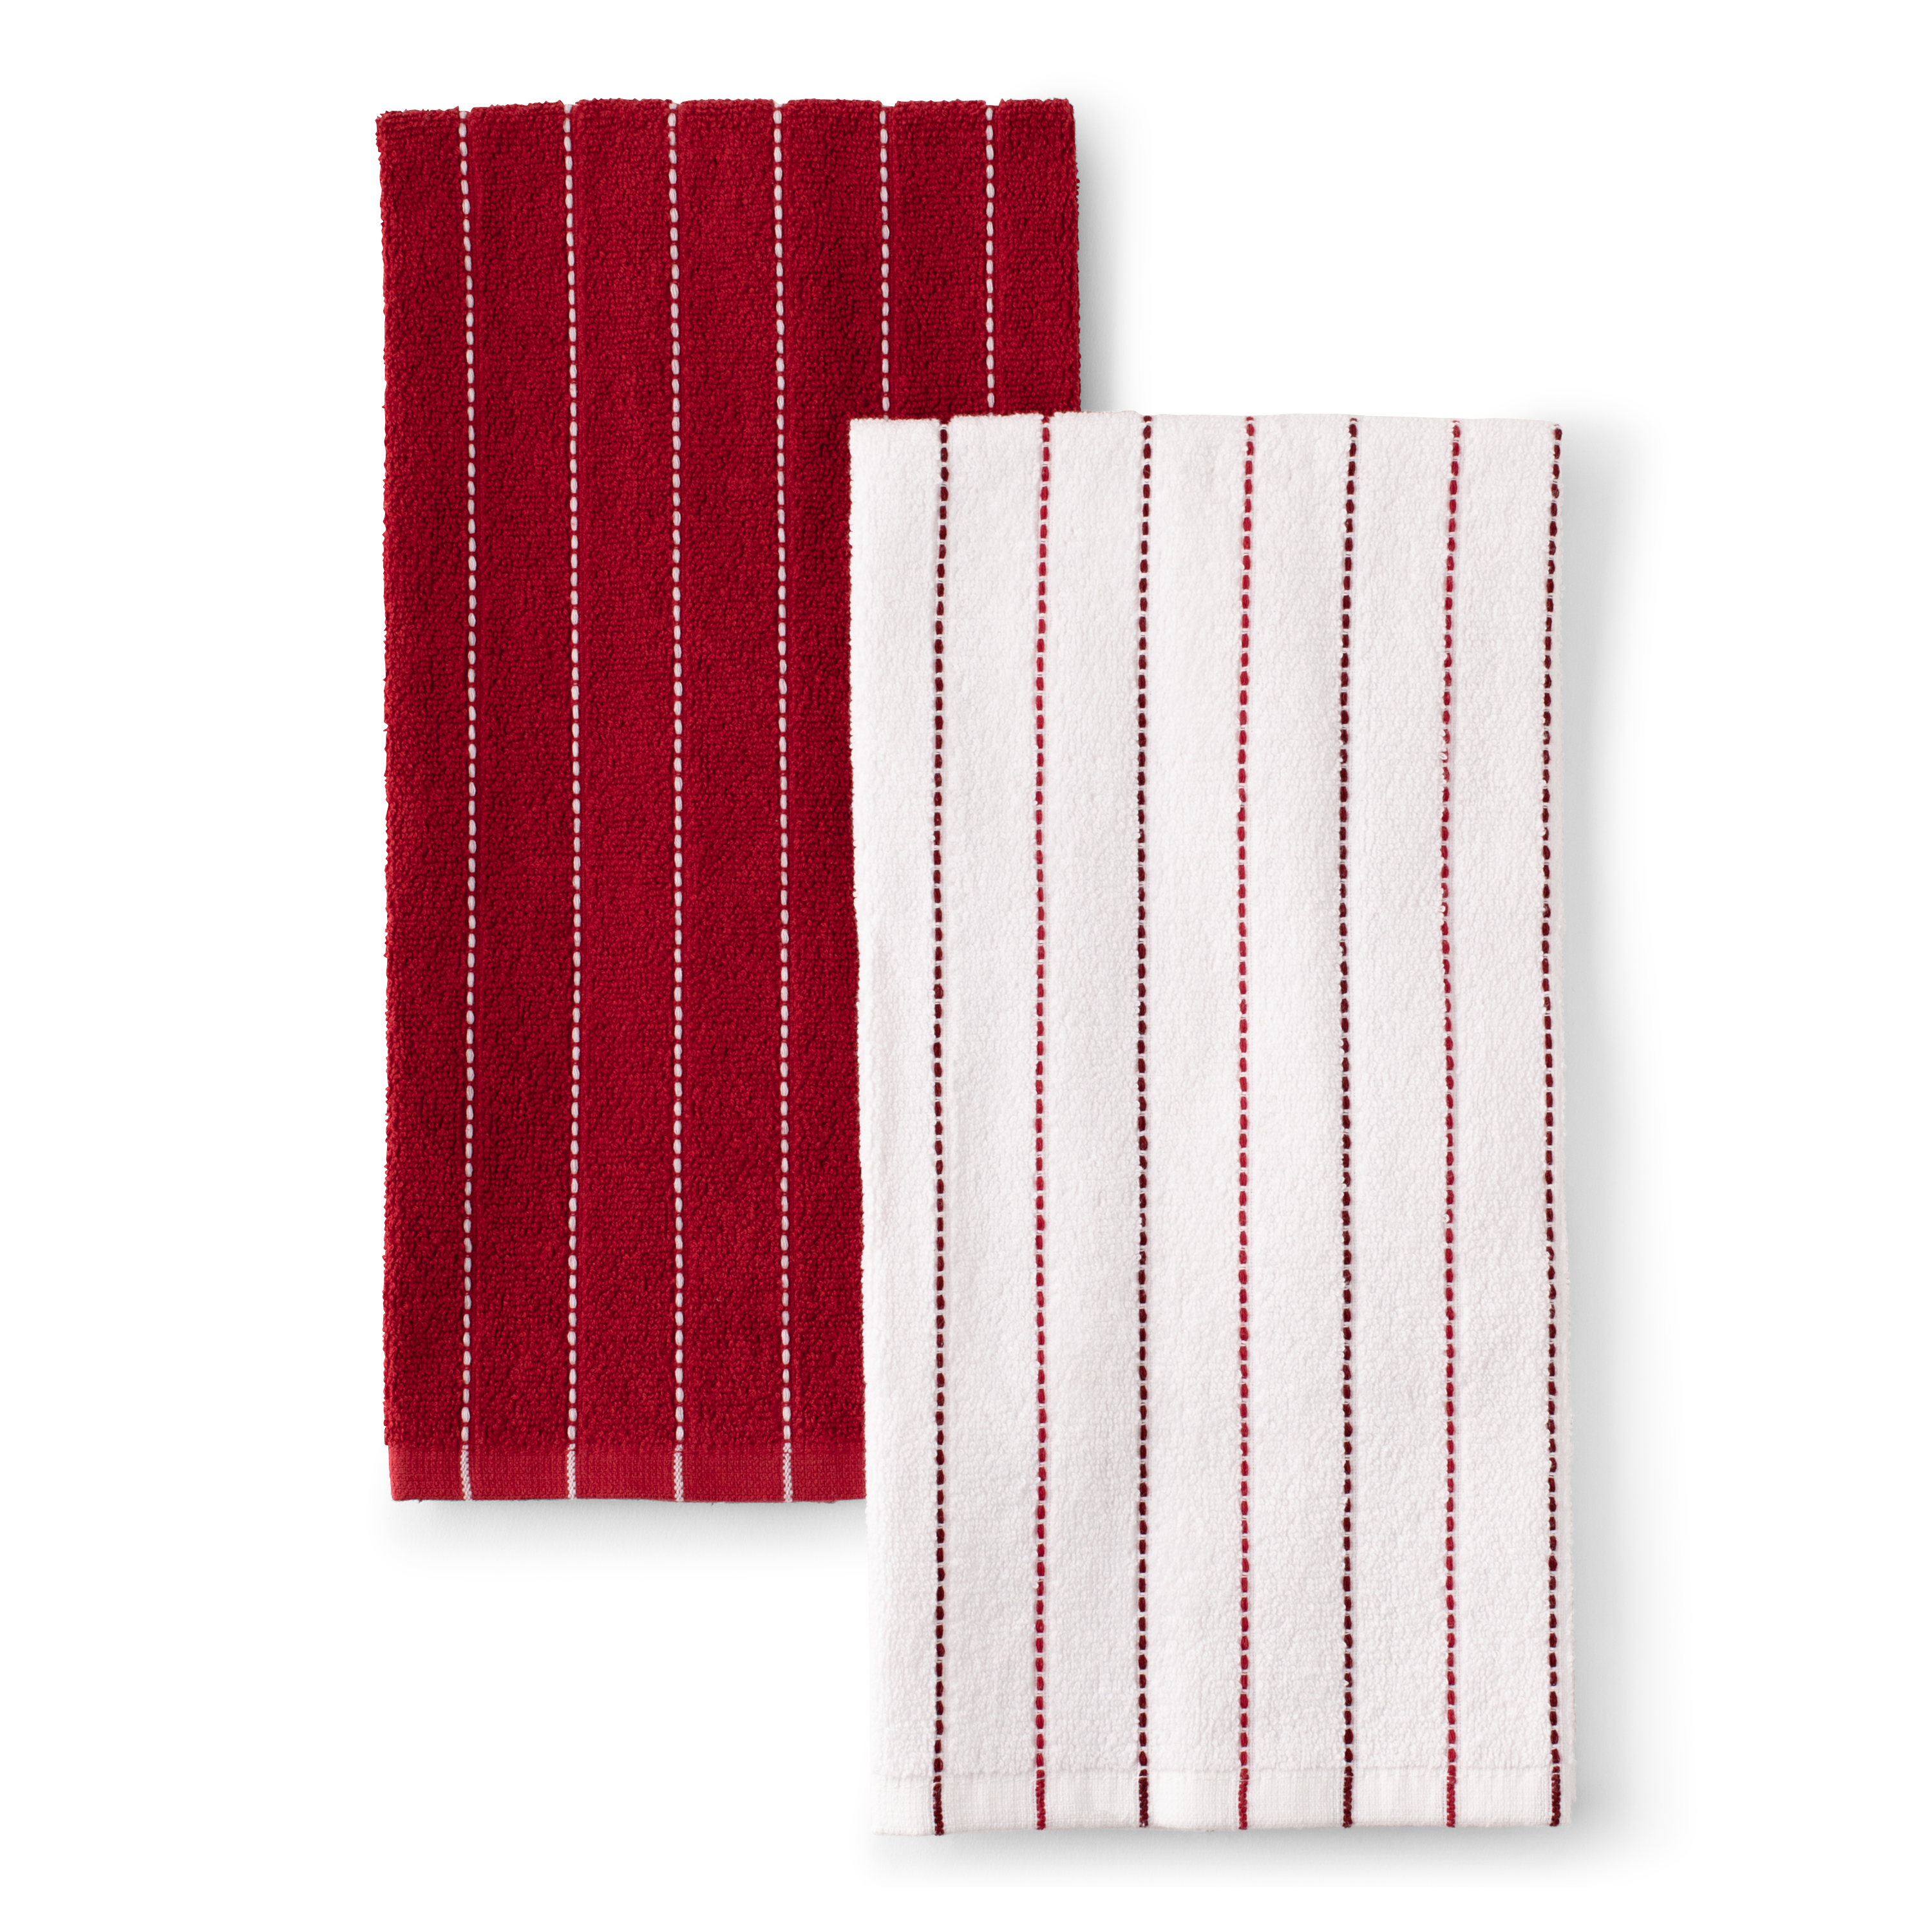 Better Homes & Gardens Kitchen Towel Set, Red, 4 Count - image 3 of 6